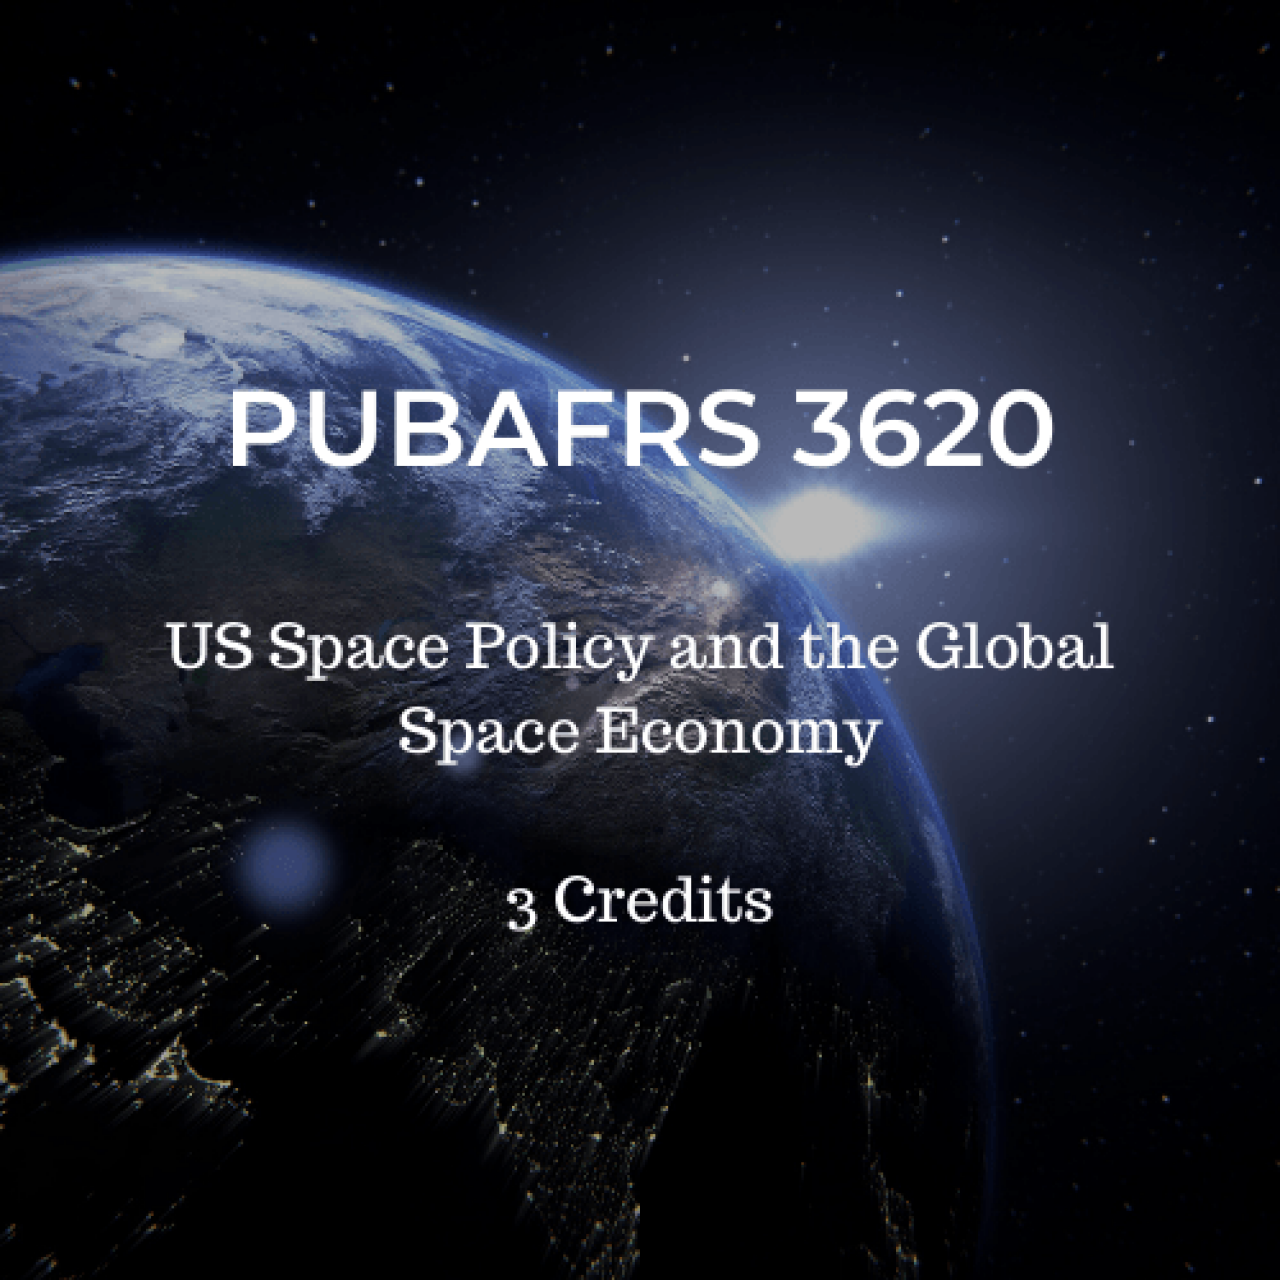 A view of the earth from space with the sun just cresting on the outside right edge of the globe with the words: "PUBAFRS 3620; US Space Policy and the Global Space Economy; 3 credits" on top of the picture